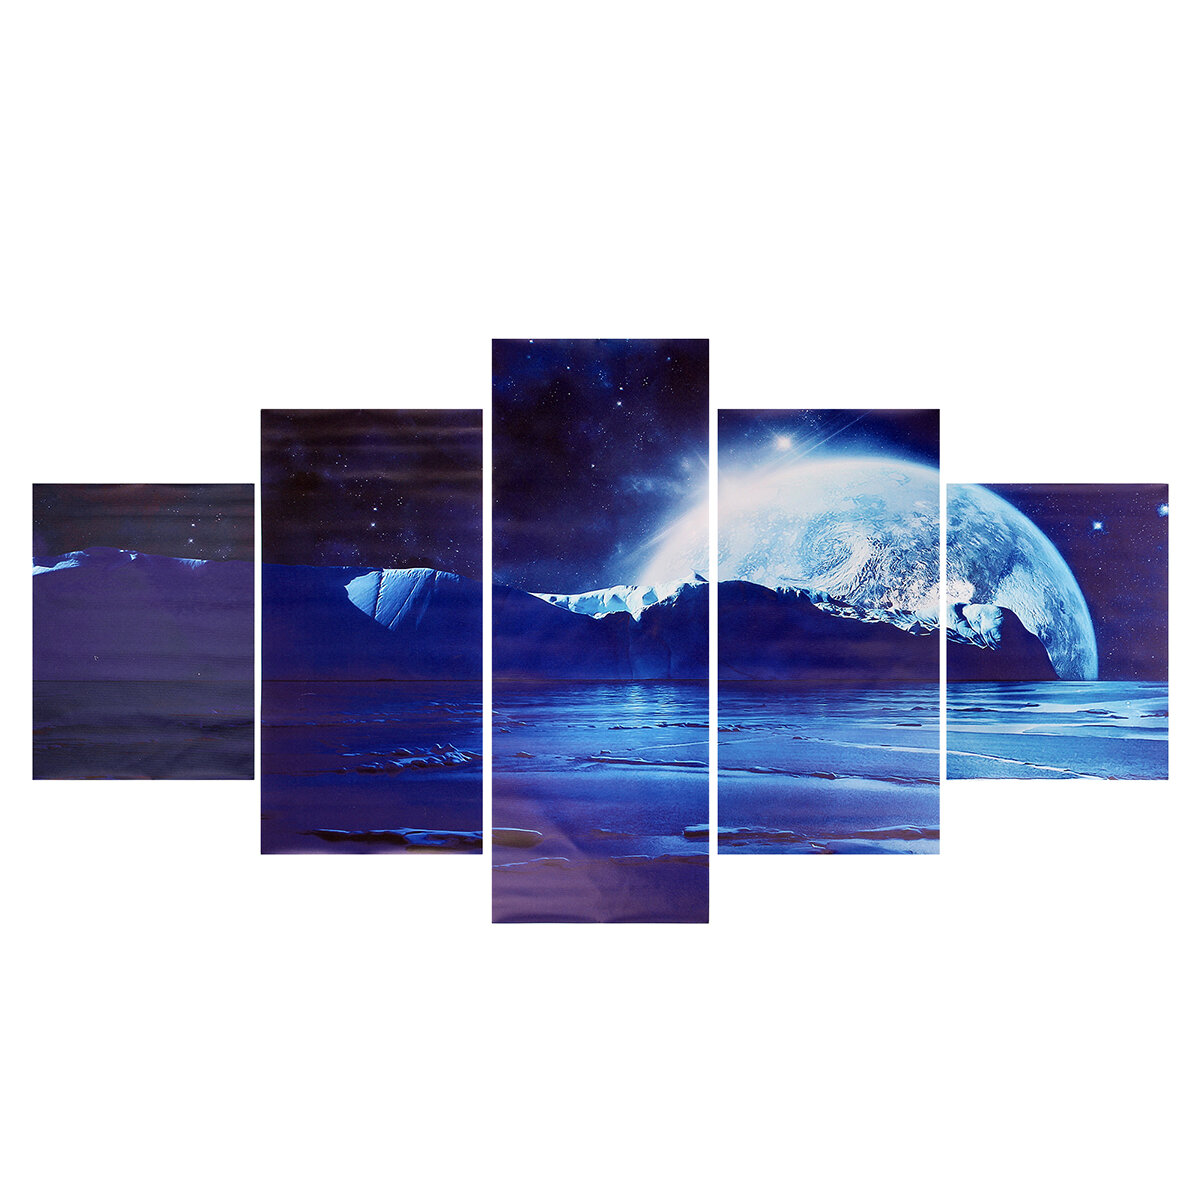 

5Pcs Blue Universe Canvas Paintings Wall Decorative Print Art Pictures Frameless Wall Hanging Decorations for Home Offic